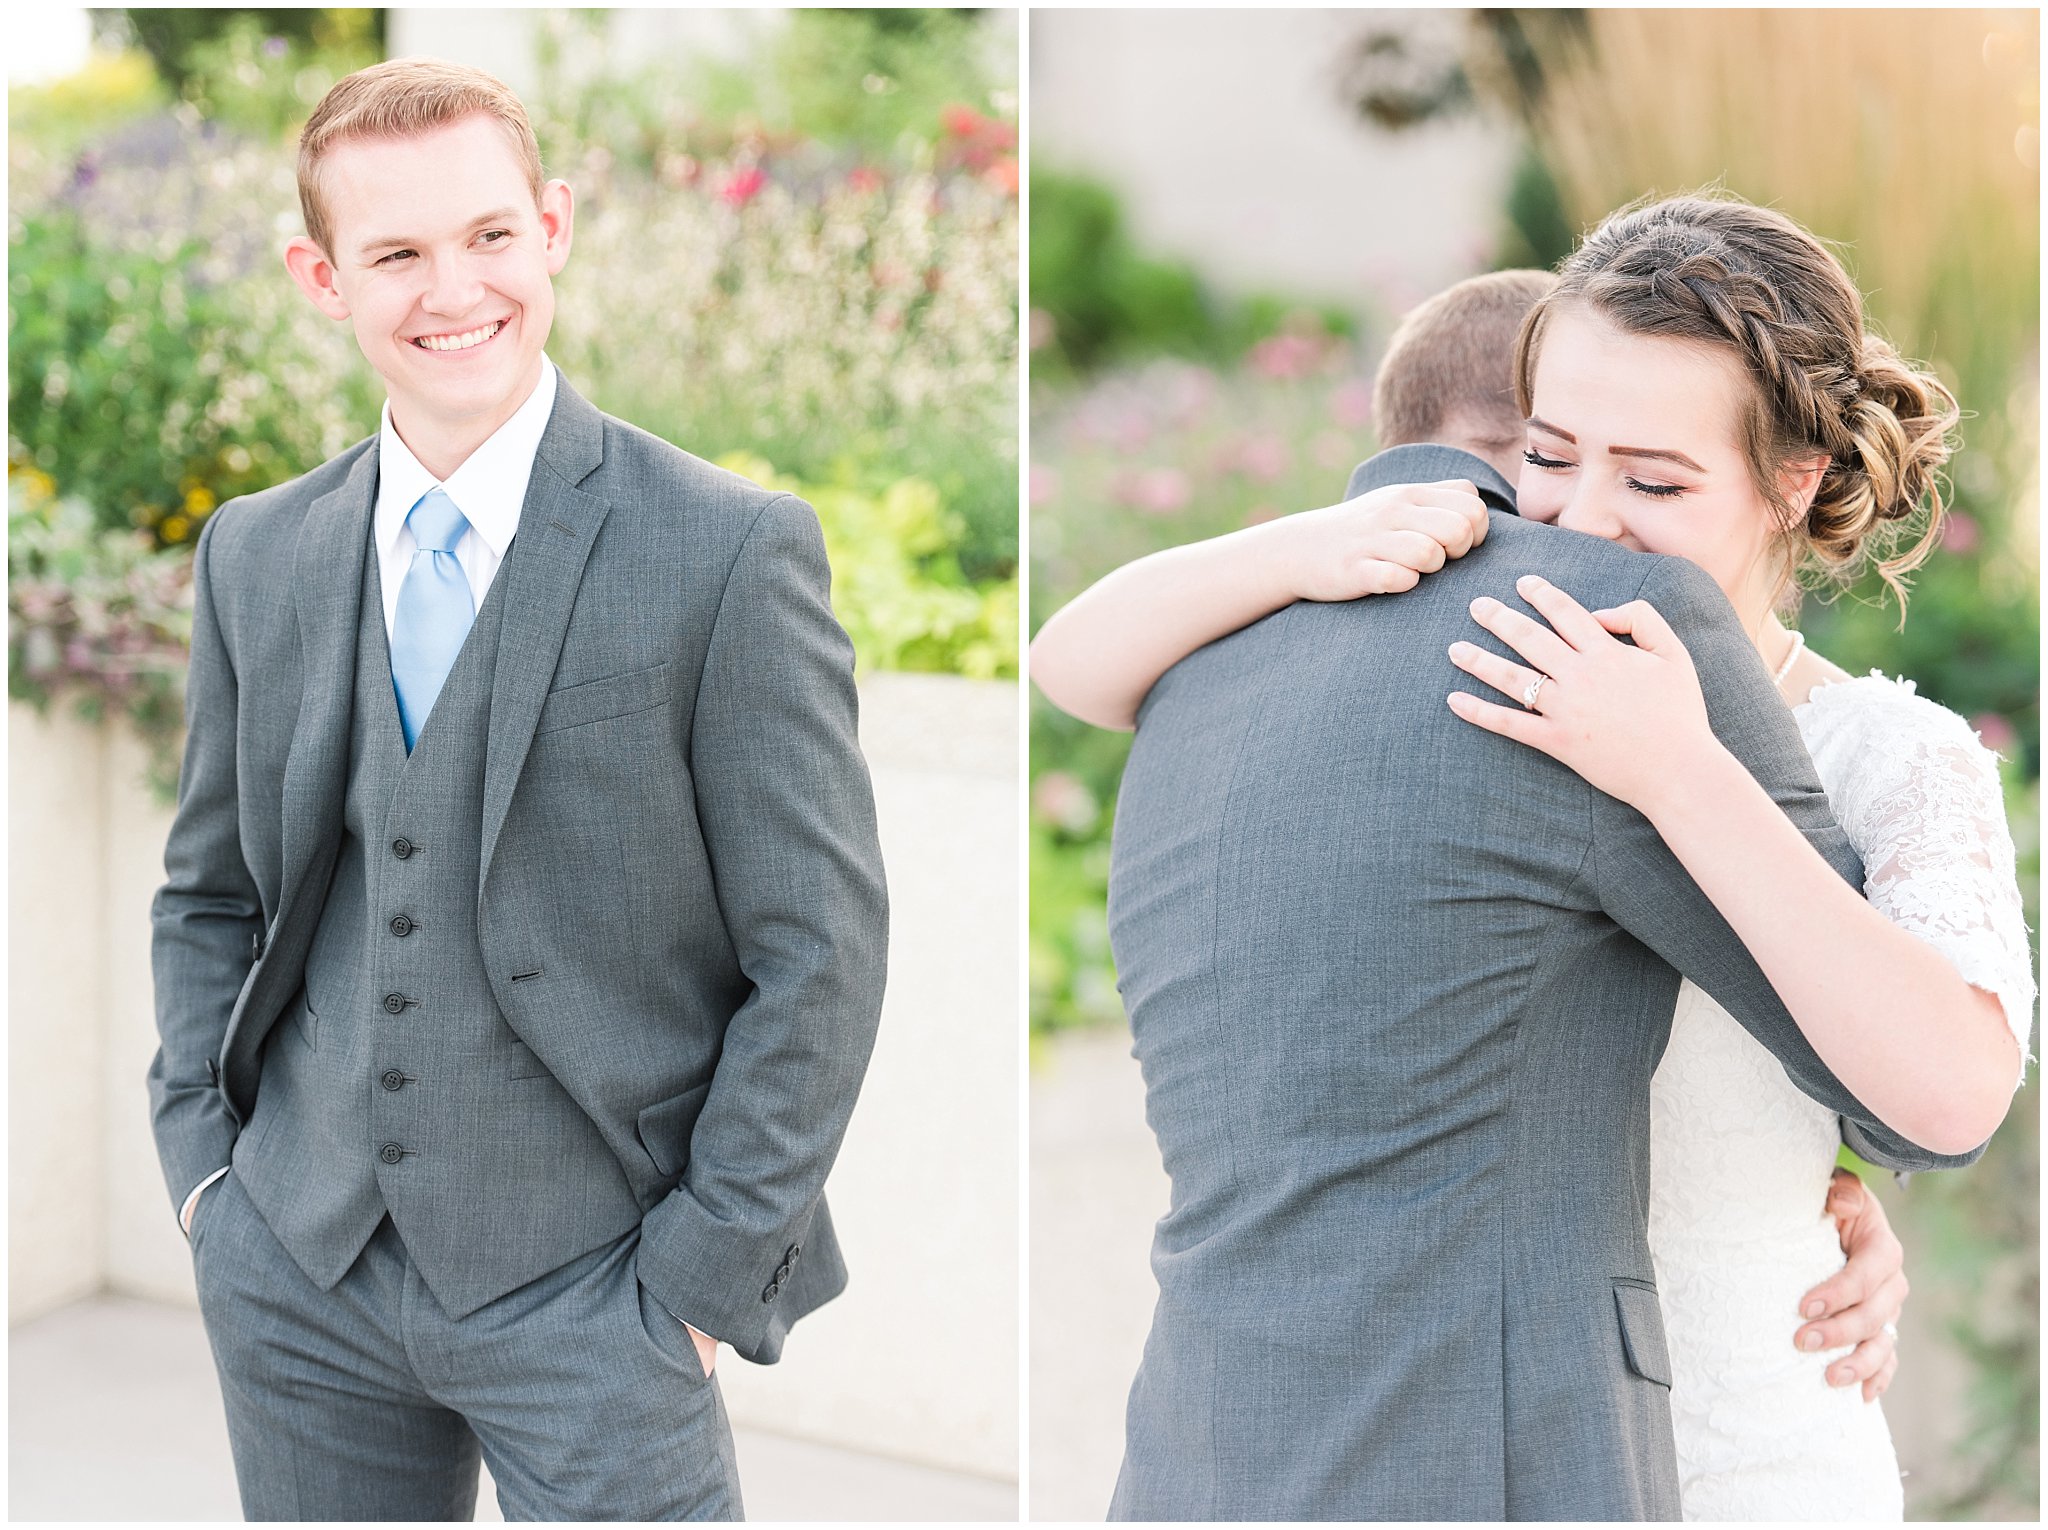 Bride's reaction during first look at the Ogden Temple | Top Utah Wedding and Couples Photos 2019 | Jessie and Dallin Photography